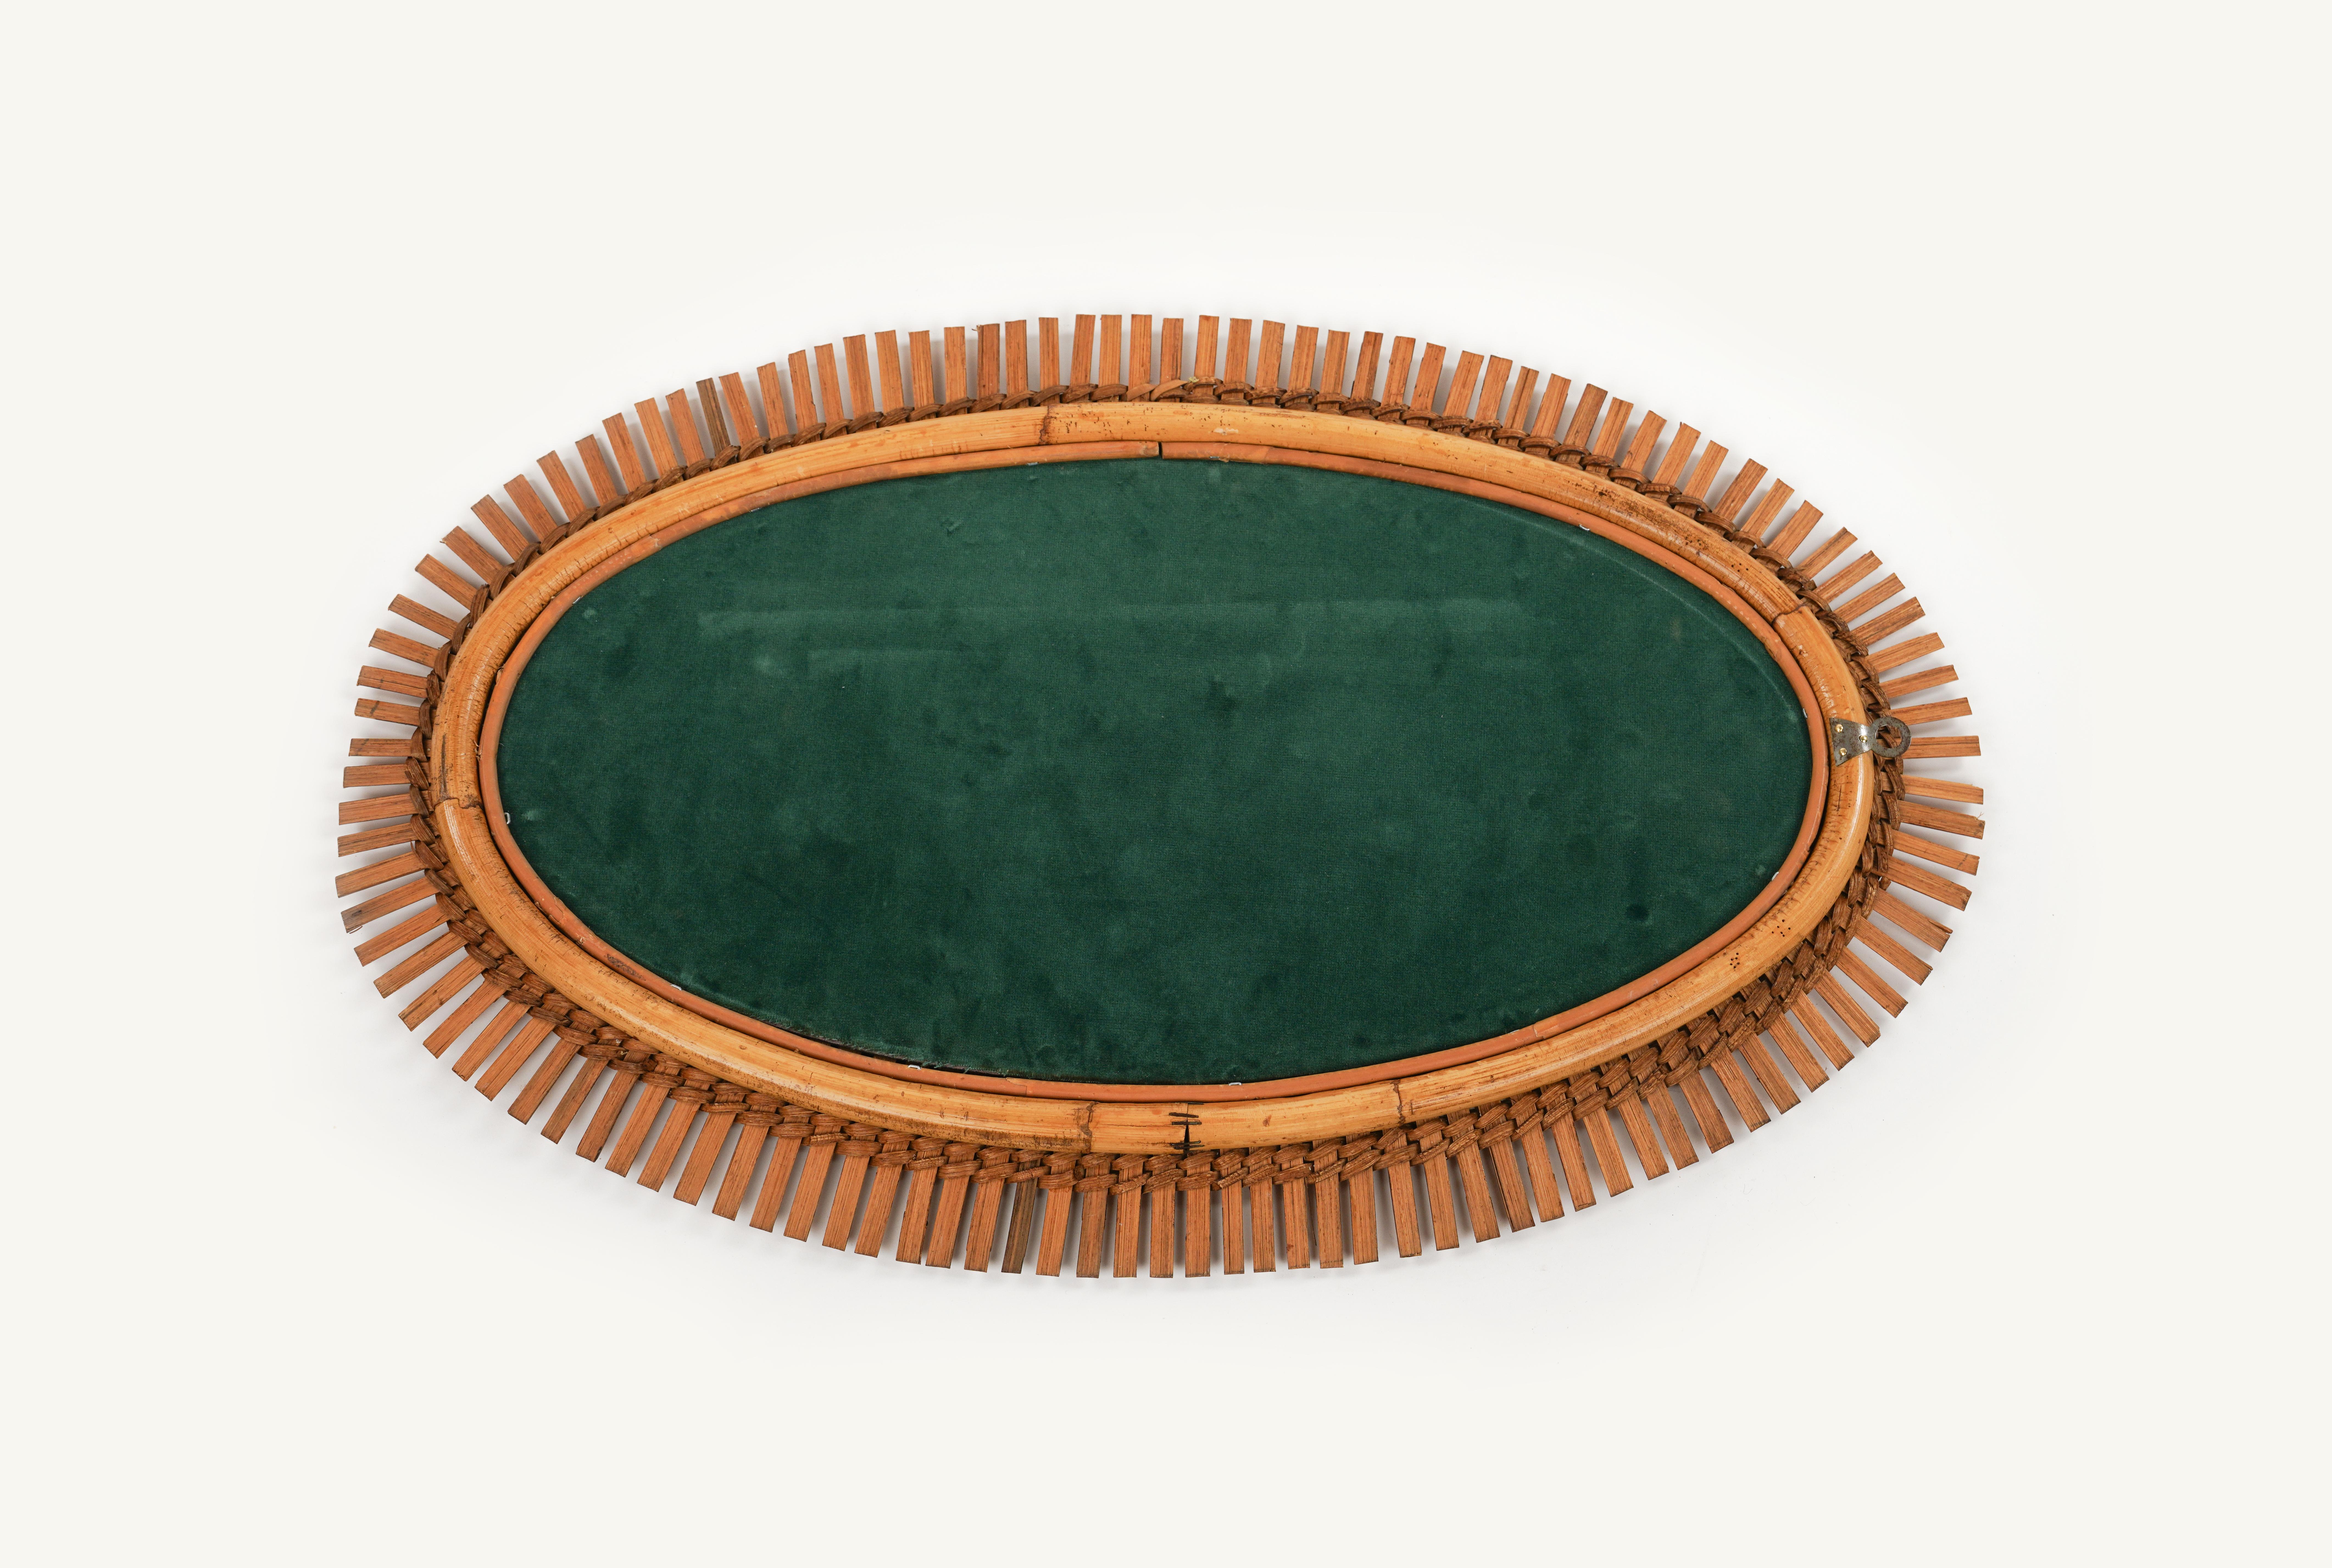 Midcentury Rattan and Bamboo Oval Wall Mirror, Italy 1960s For Sale 5